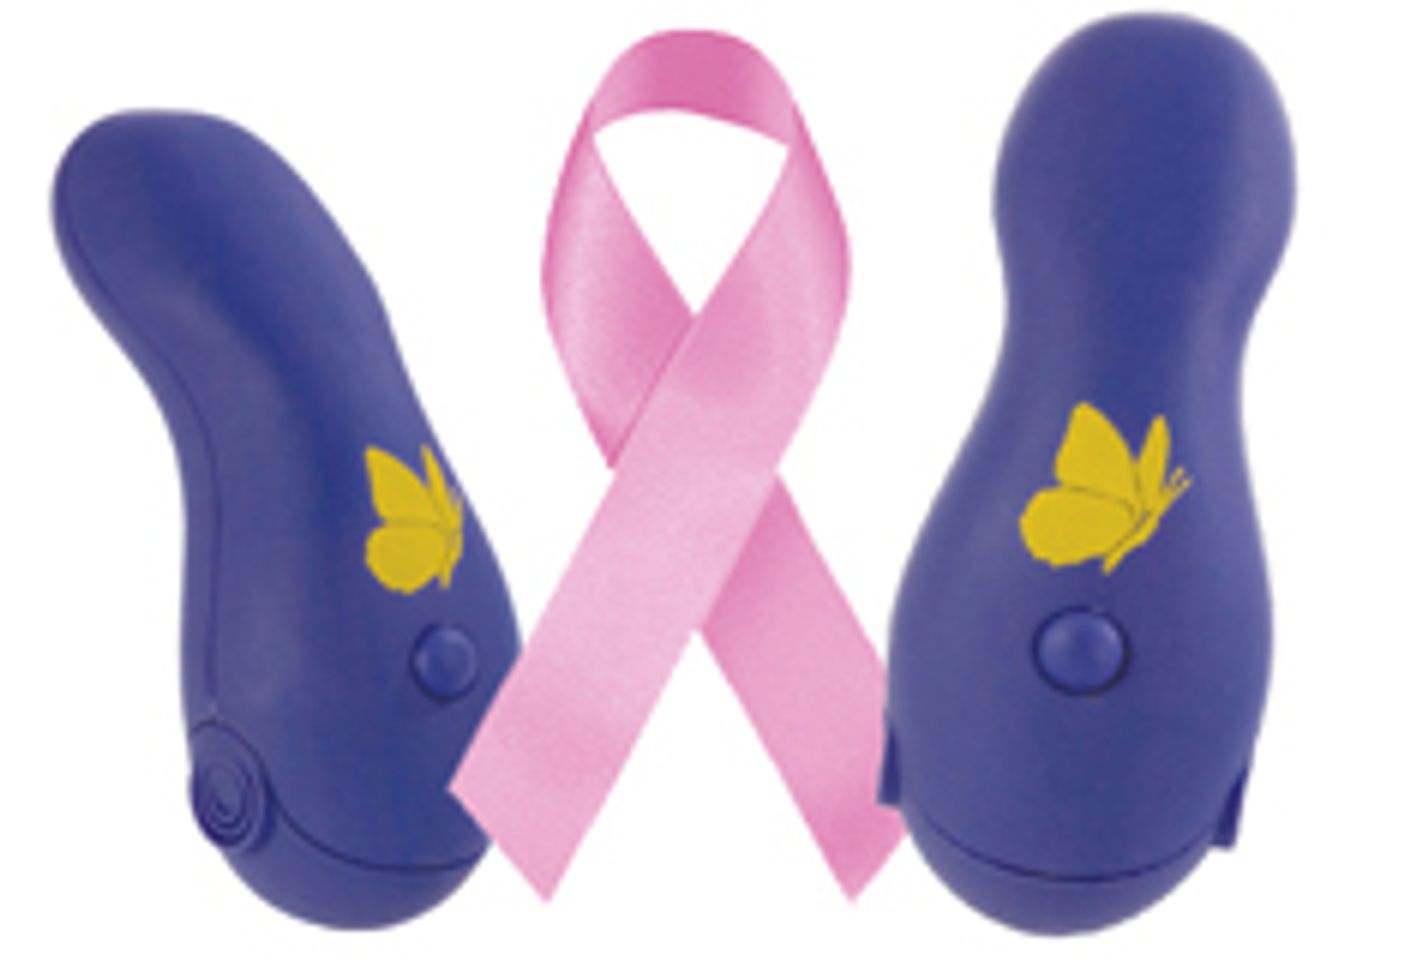 Cal Exotics Massager to Support Breast-Cancer Charity